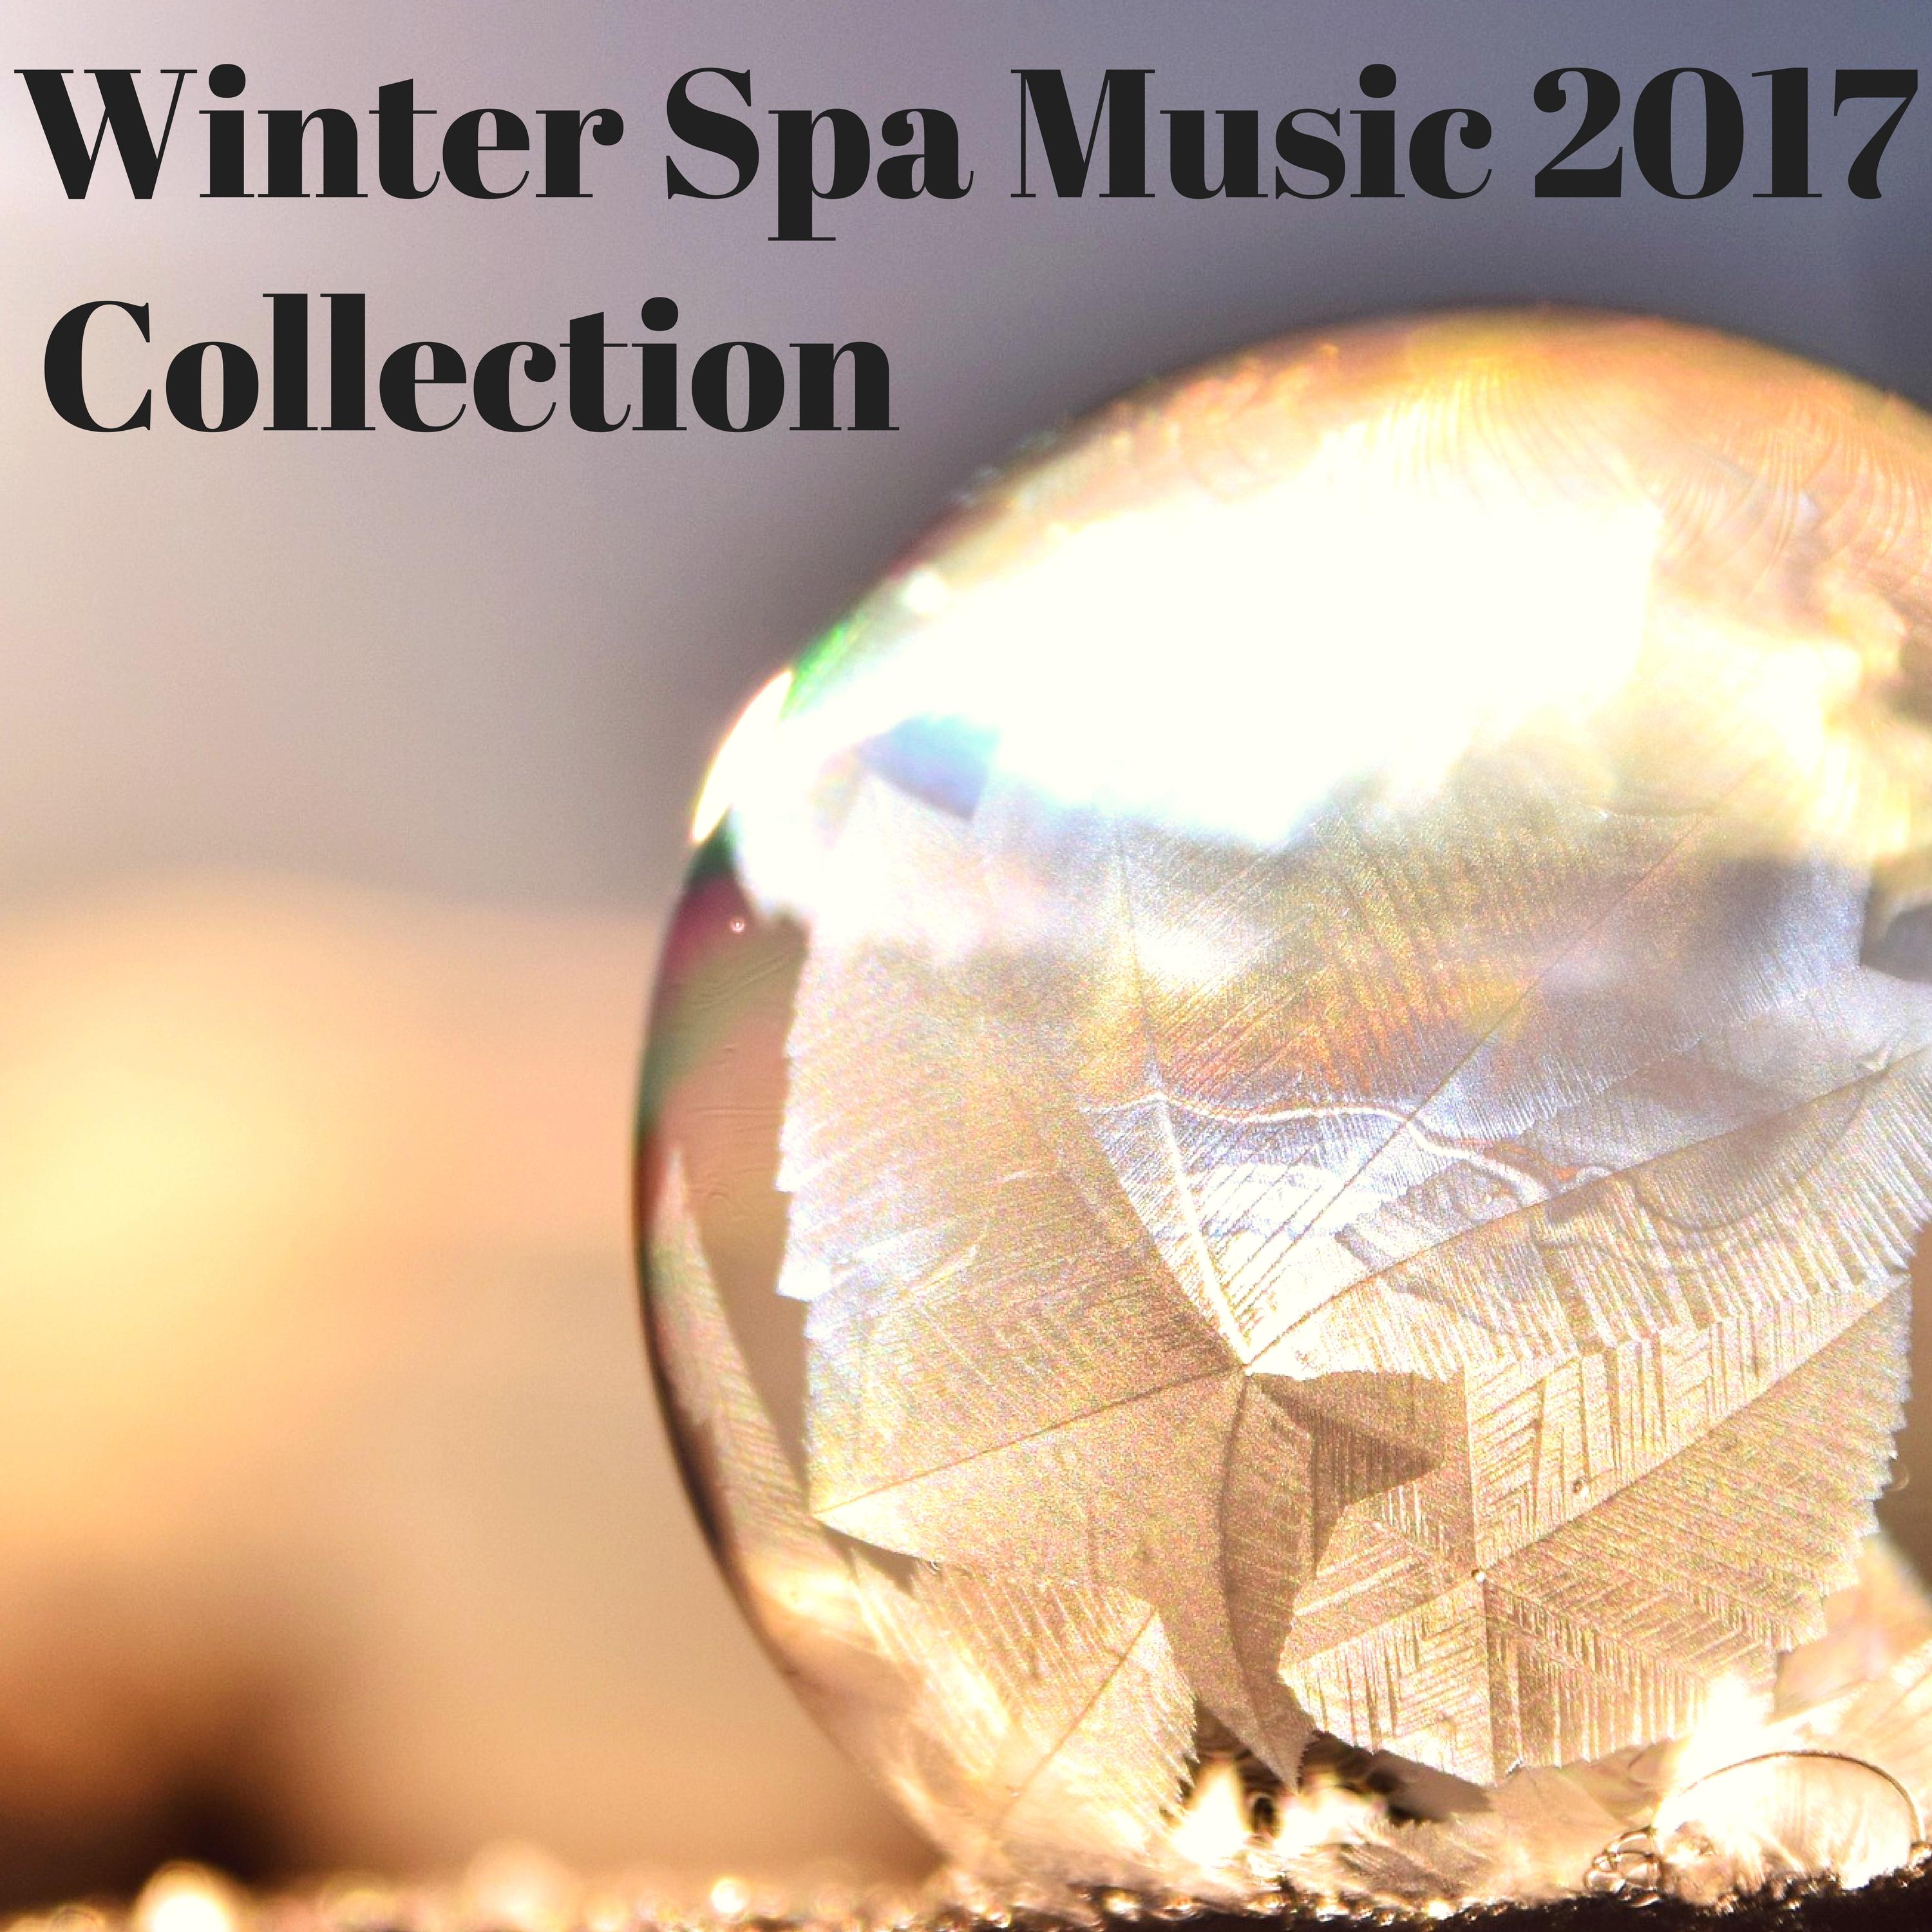 Winter Spa Music 2017 Collection - New Age Relaxation Songs for Sauna & Massage